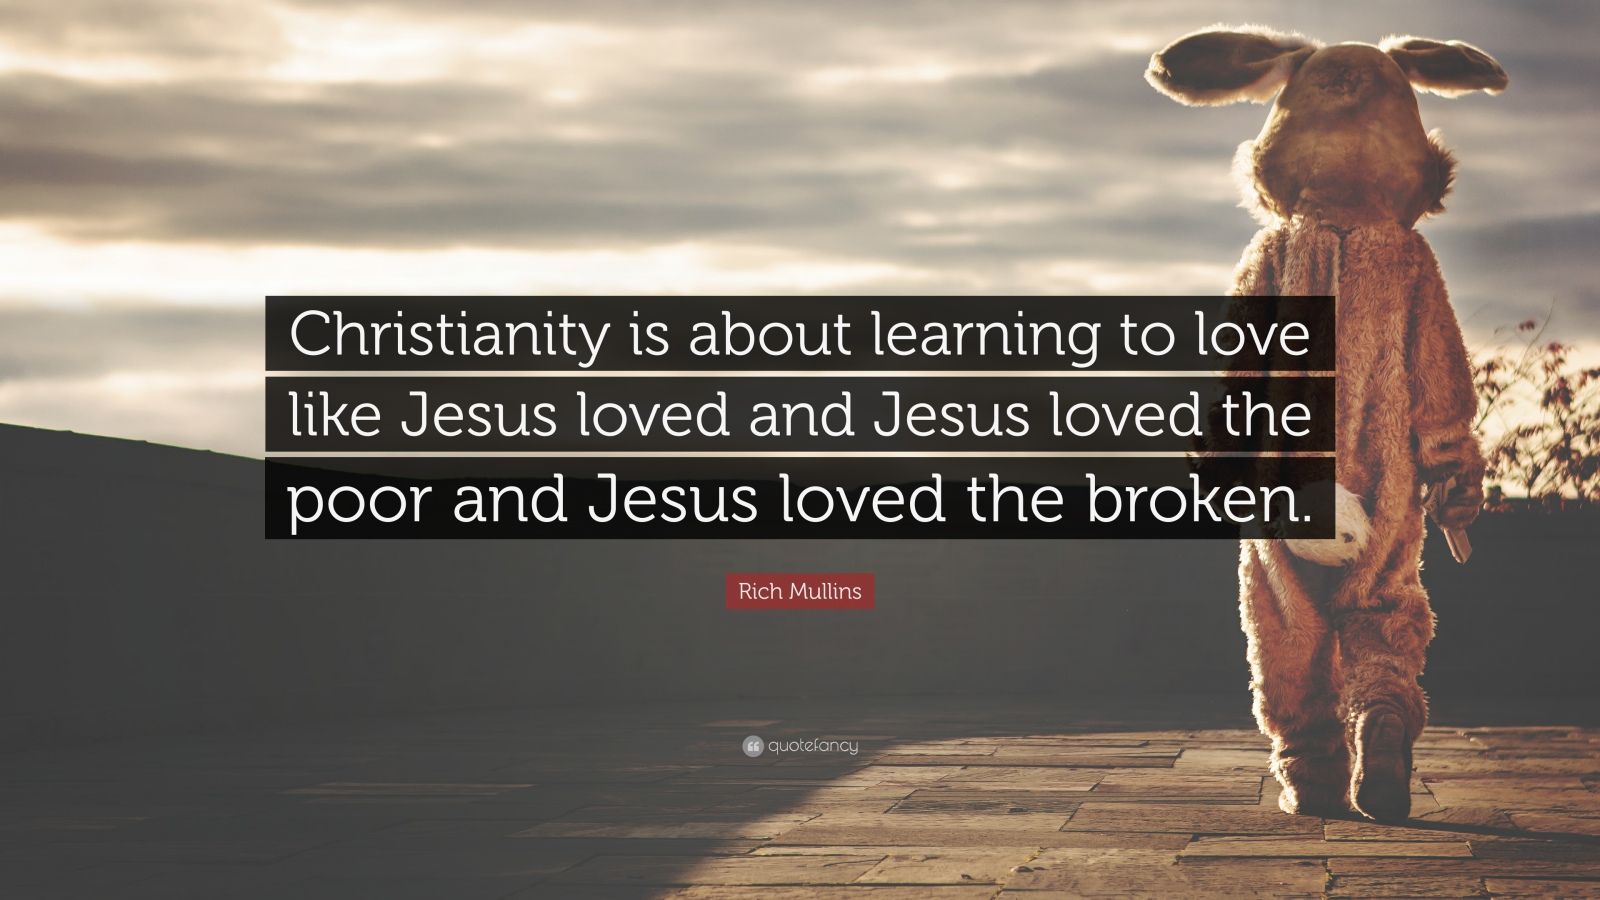 Rich Mullins Quote “Christianity is about learning to love like Jesus